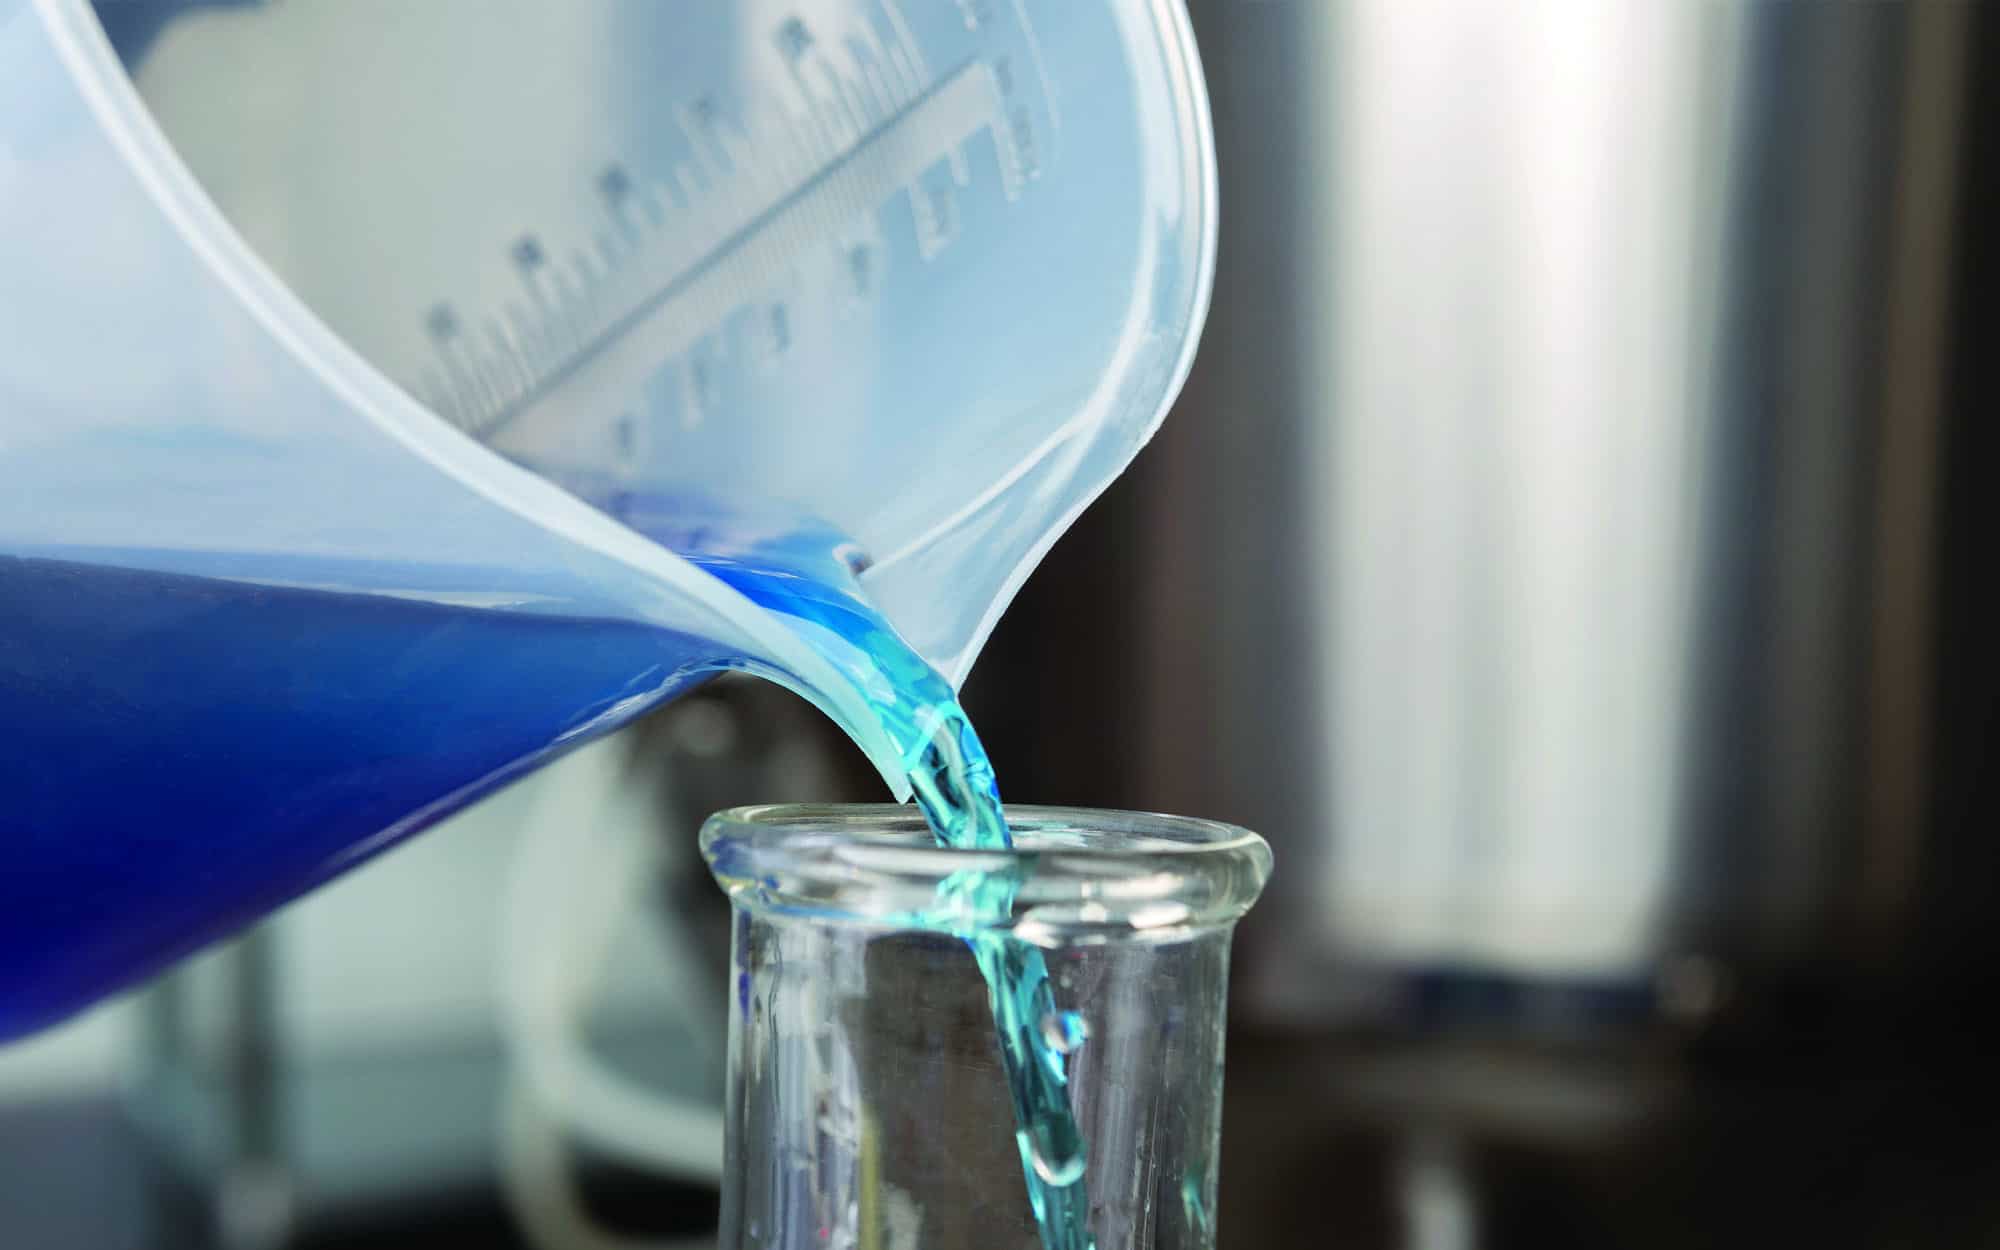 https://axiomproductsusa.com/wp-content/uploads/2021/03/Close-up-of-toxic-blue-lquid-going-into-measuring-cup.jpg